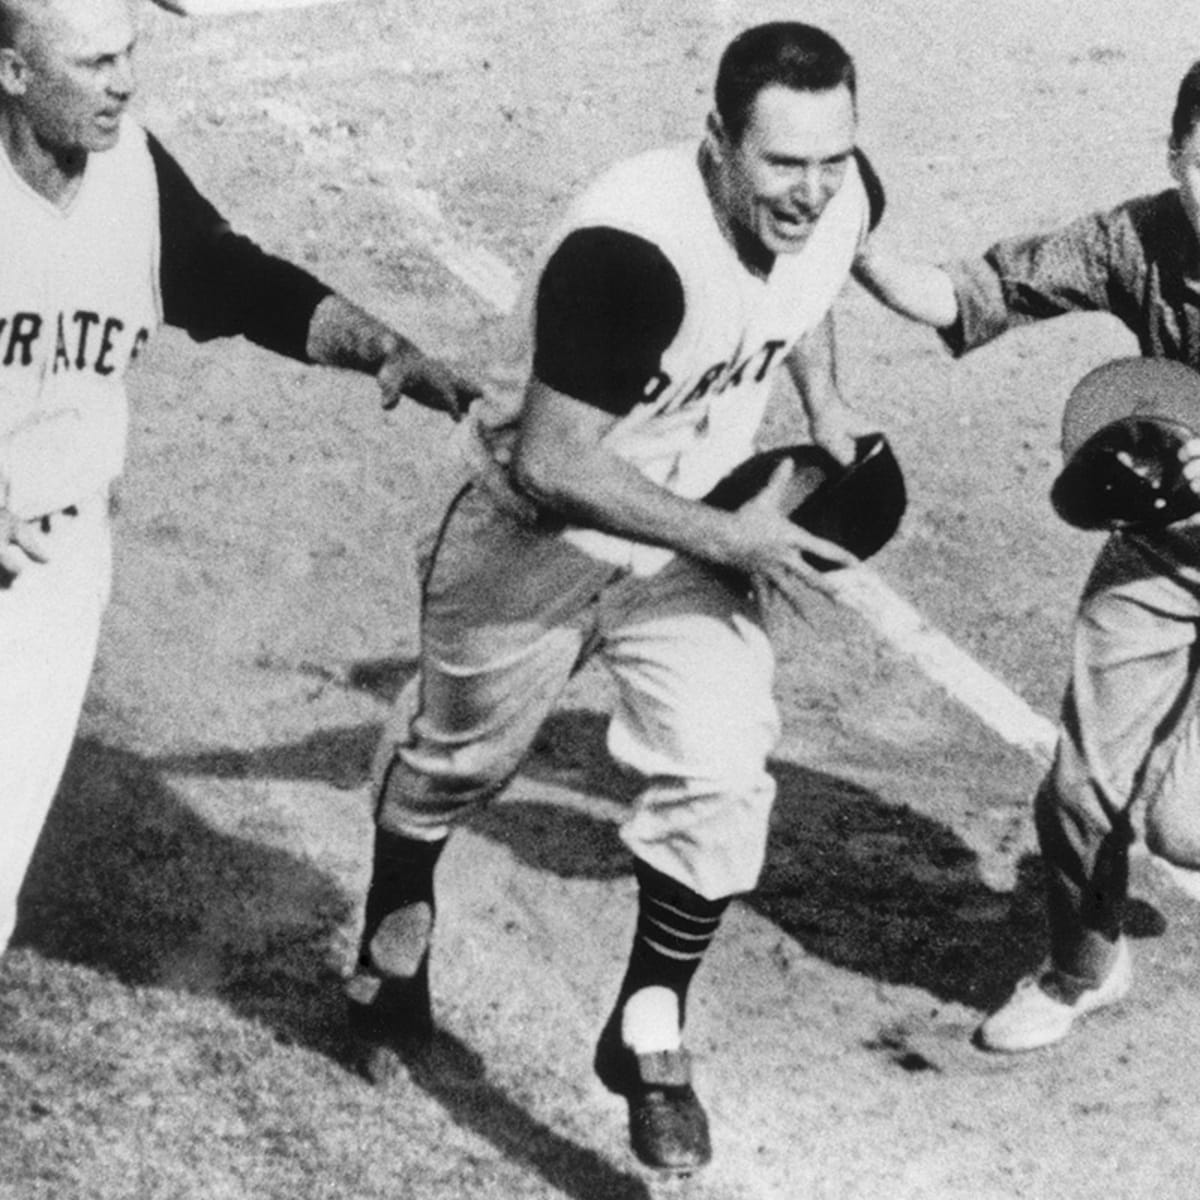 Could this be the one?': The mystery behind Bill Mazeroski's Game 7 jersey  - The Athletic